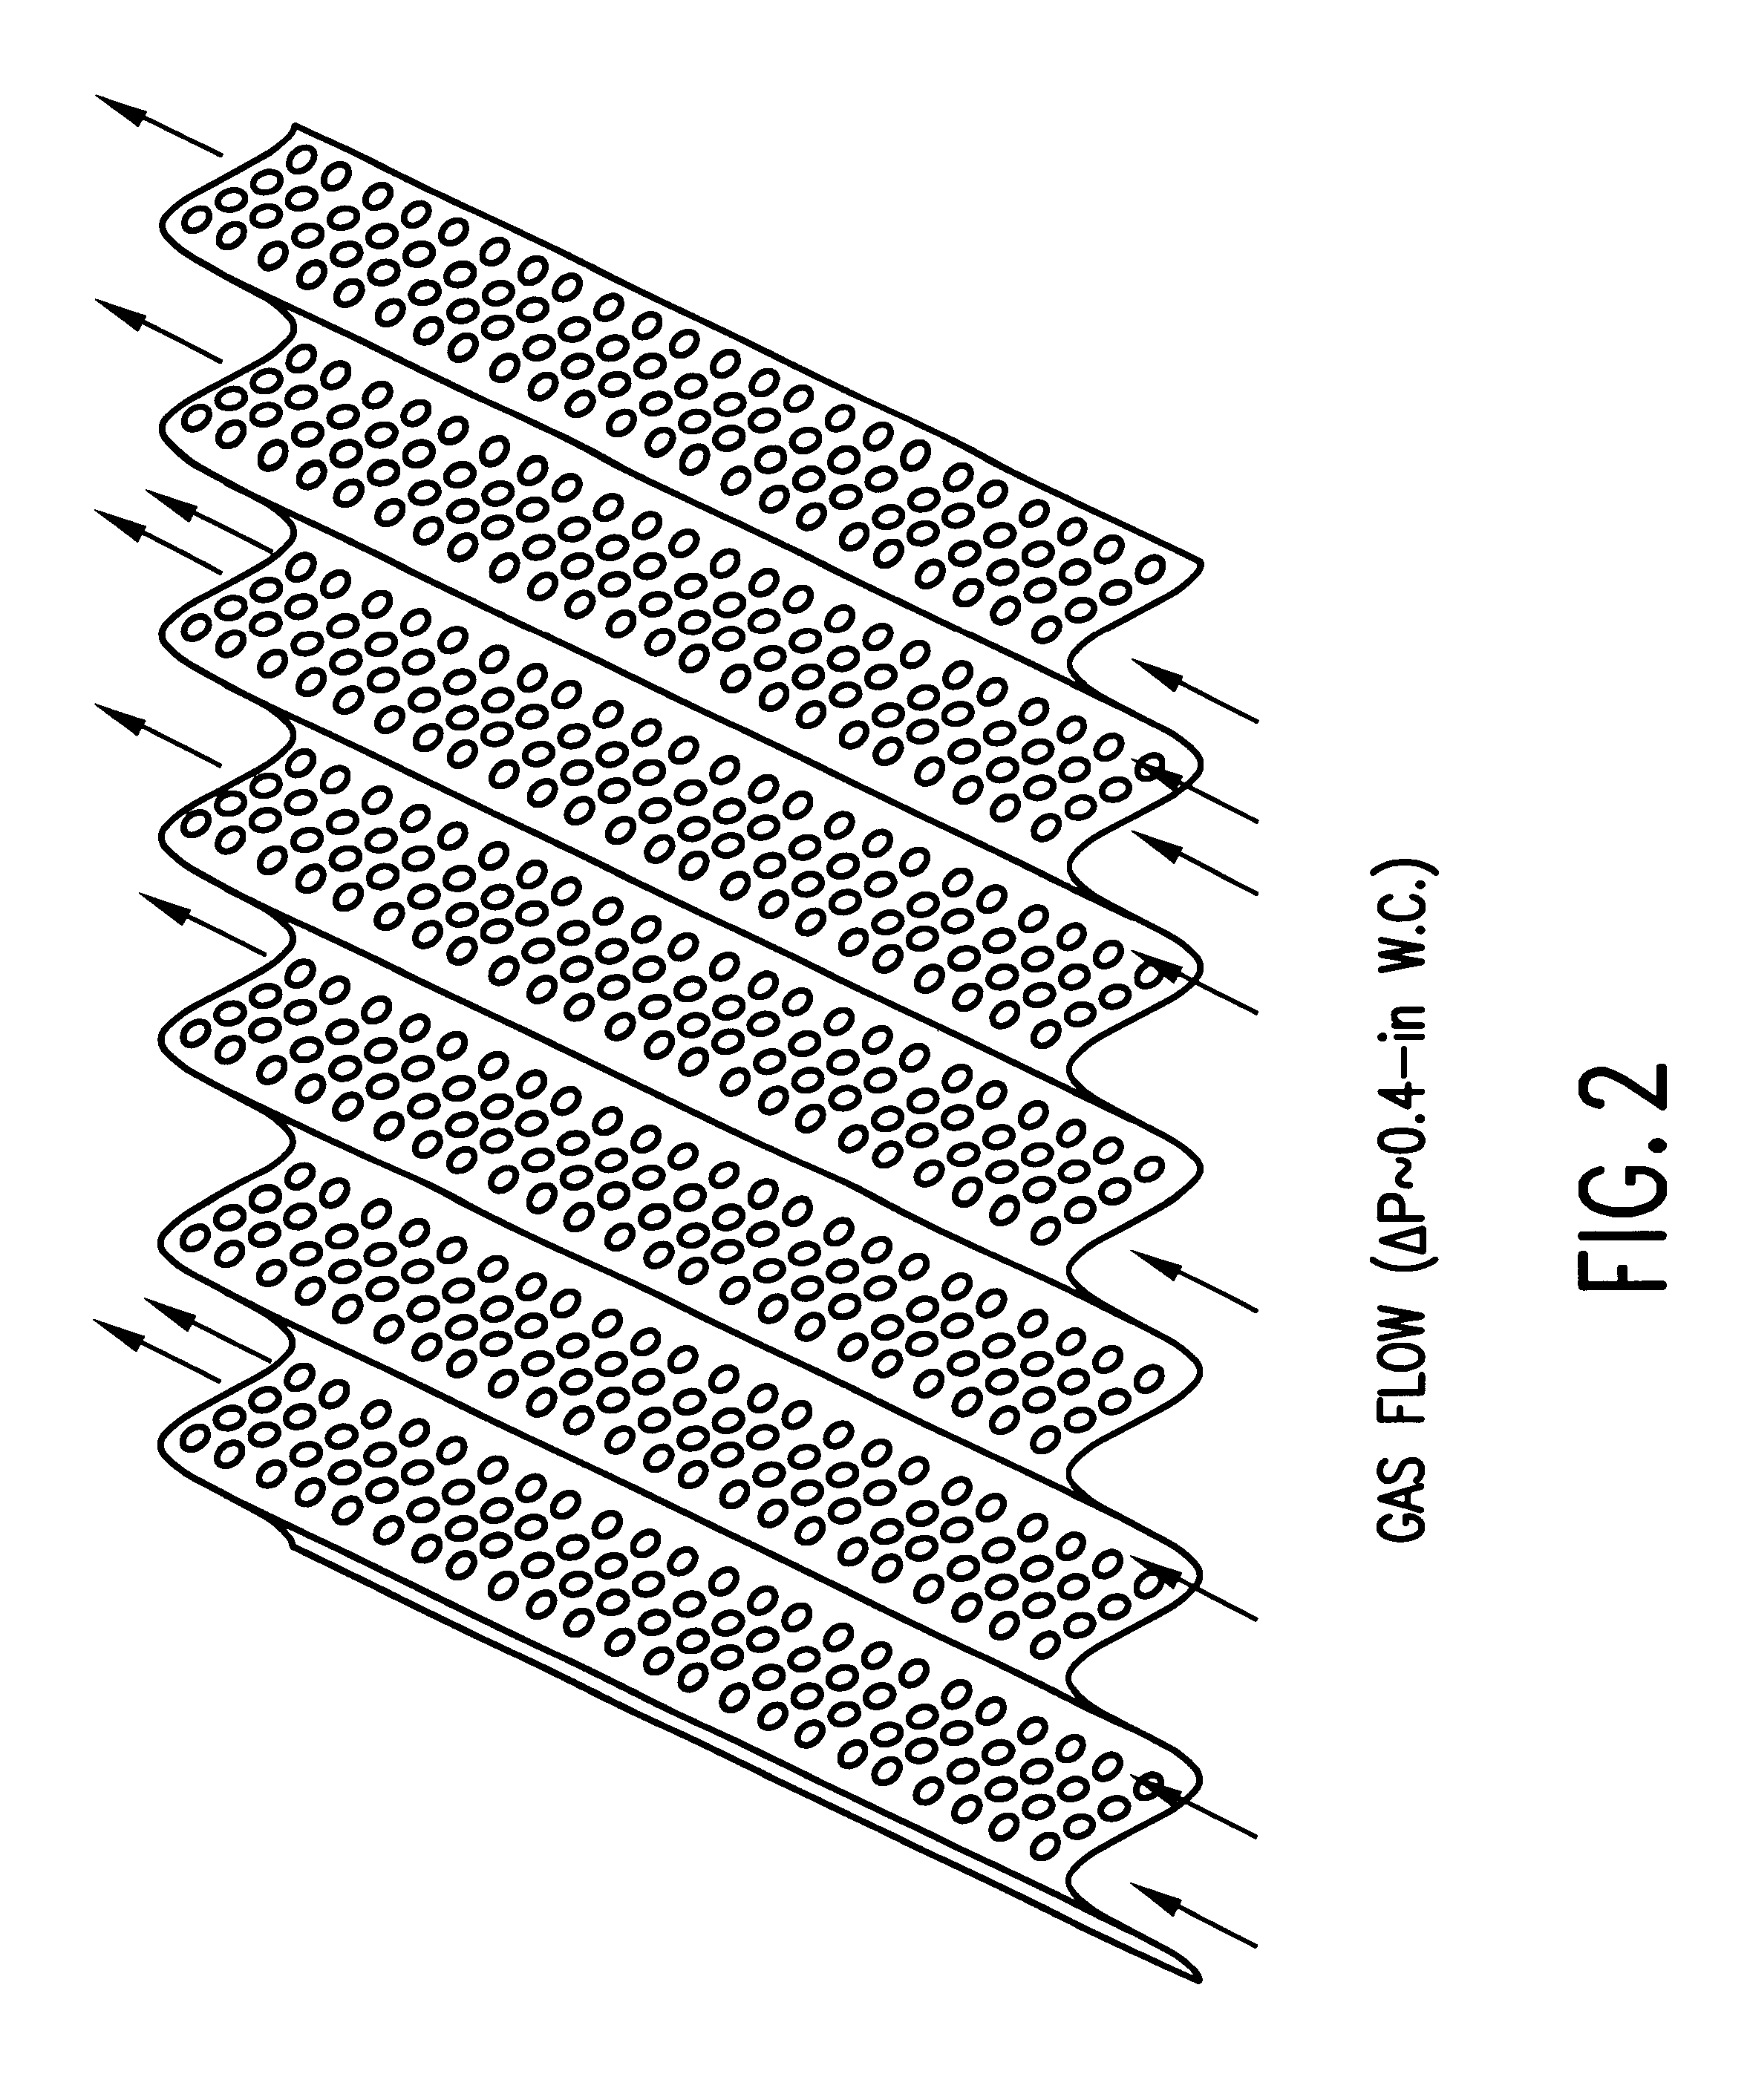 Alternative electrode supports and gas distributors for molten carbonate fuel cell applications